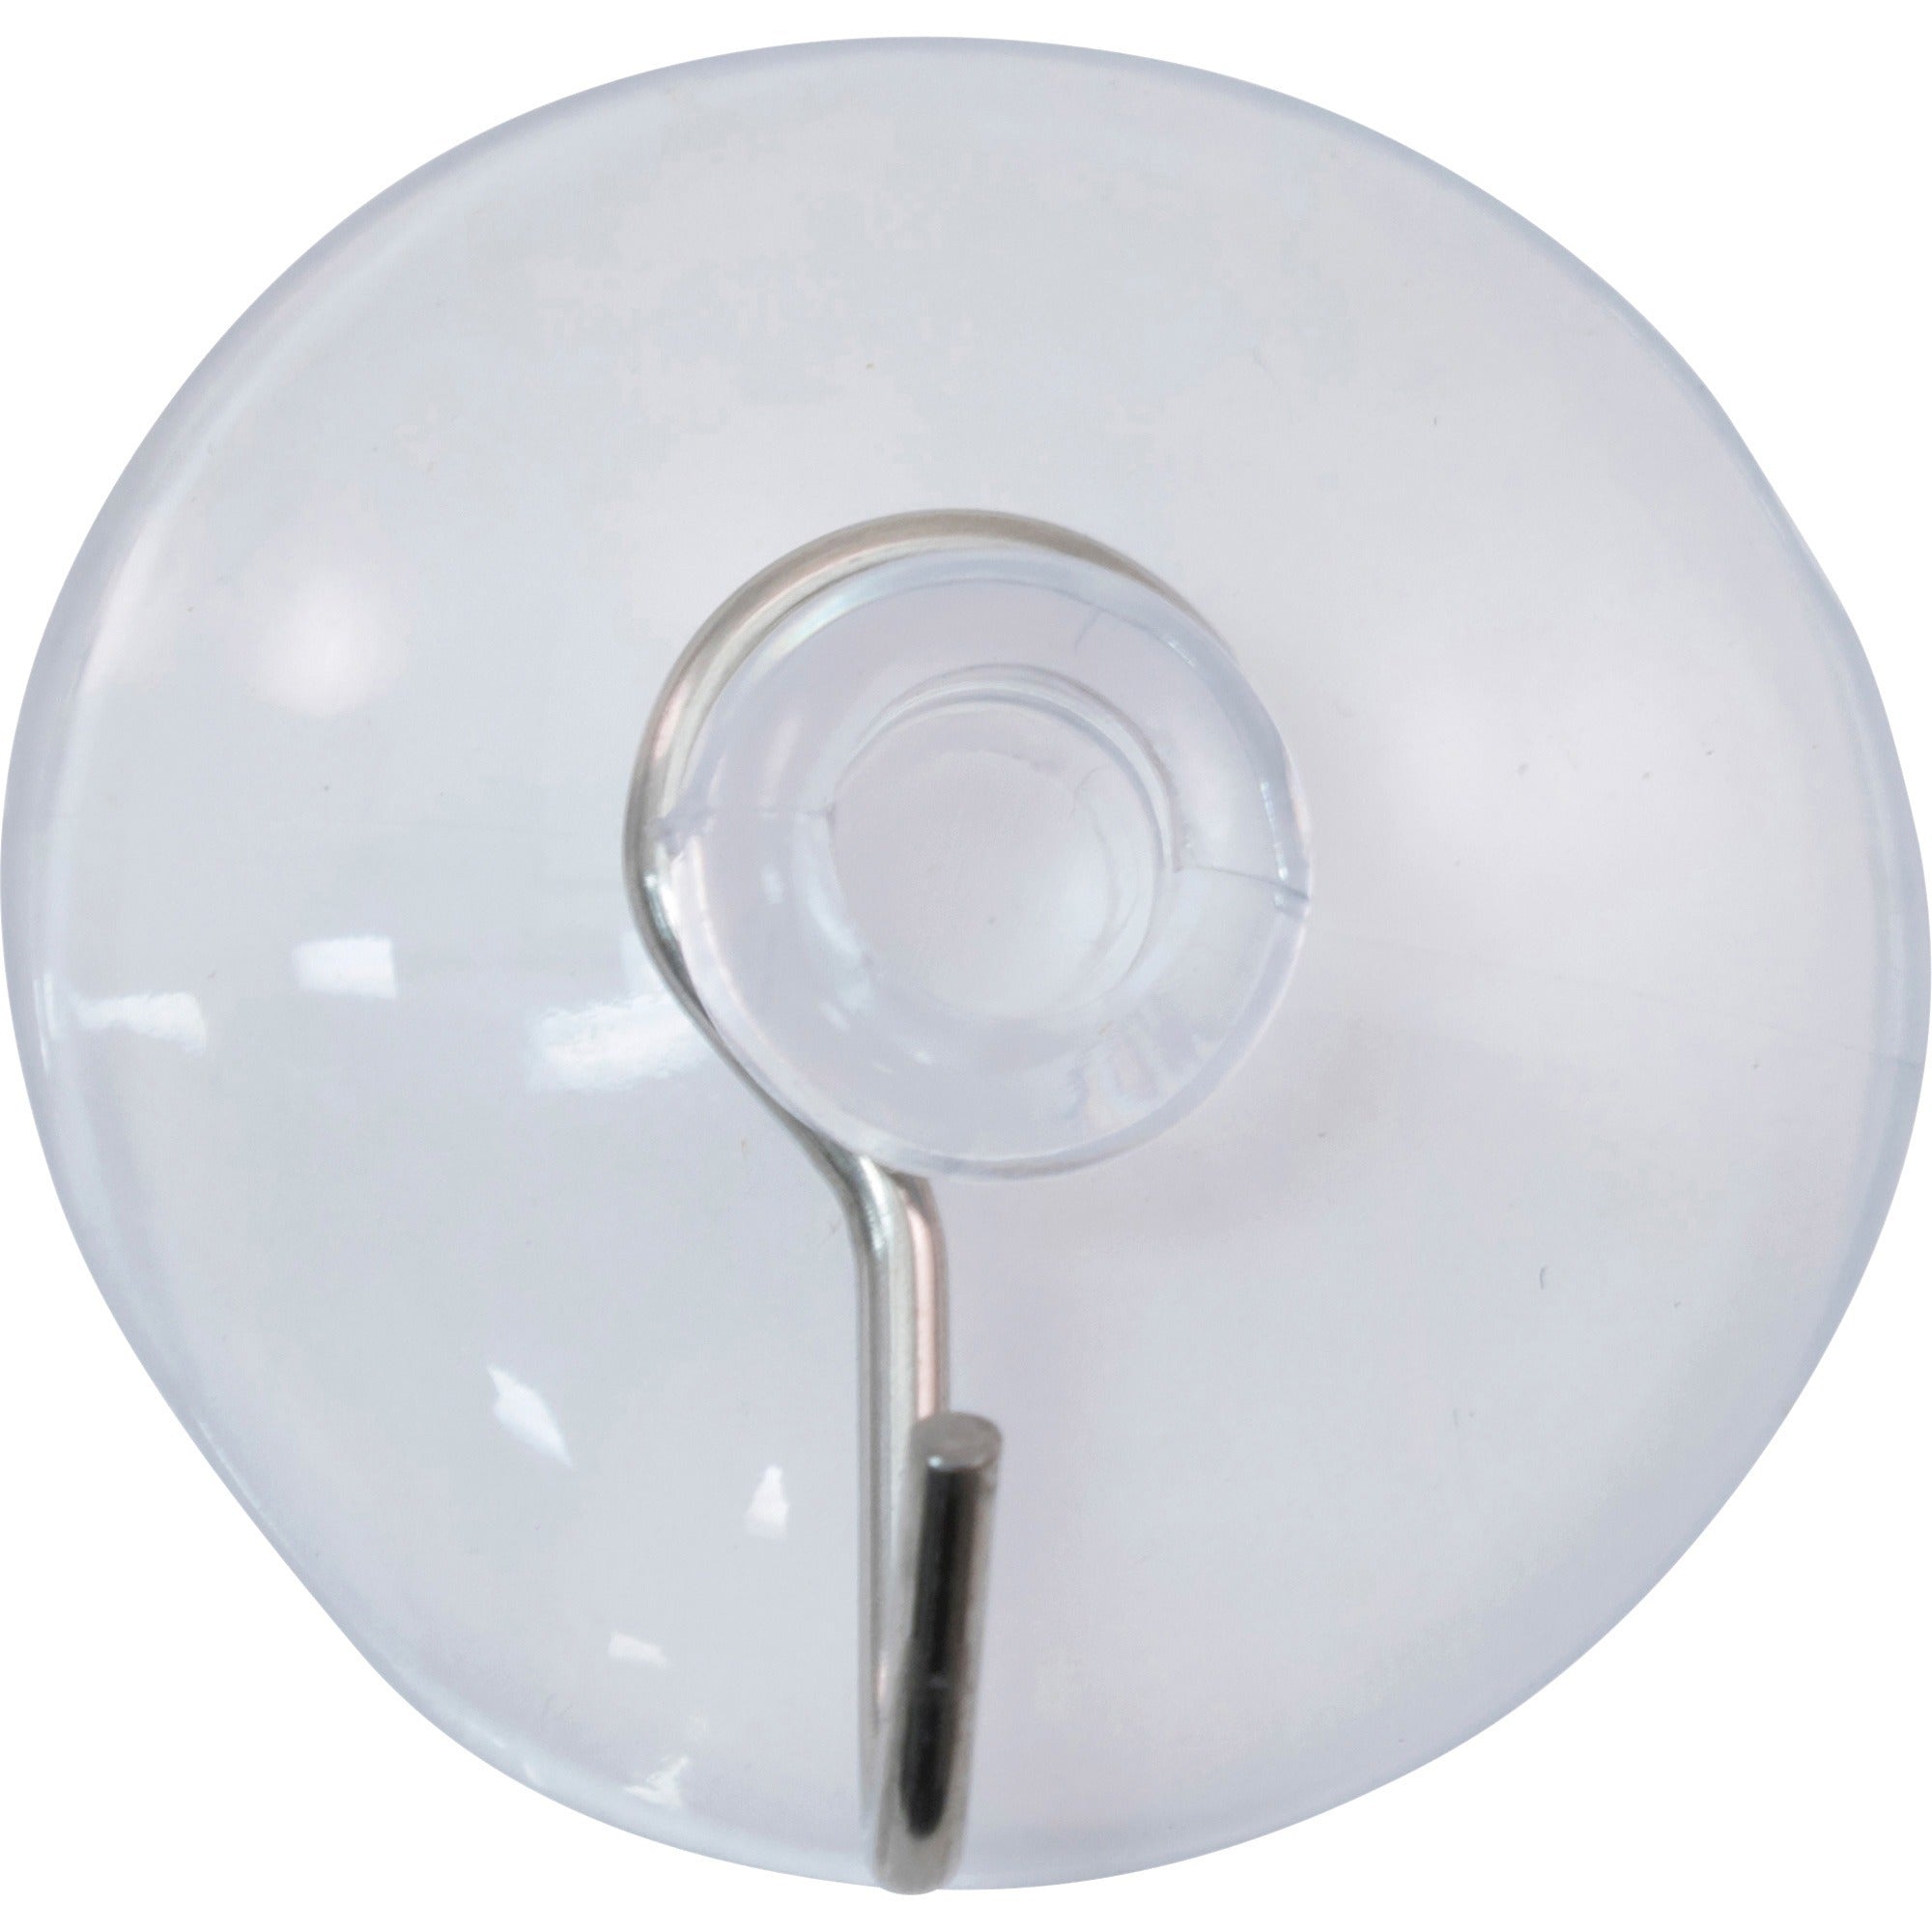 advantus-metal-hook-suction-cup-for-glass-tile-metal-kitchen-classroom-office-metal-clear-25-box_avt91031 - 1